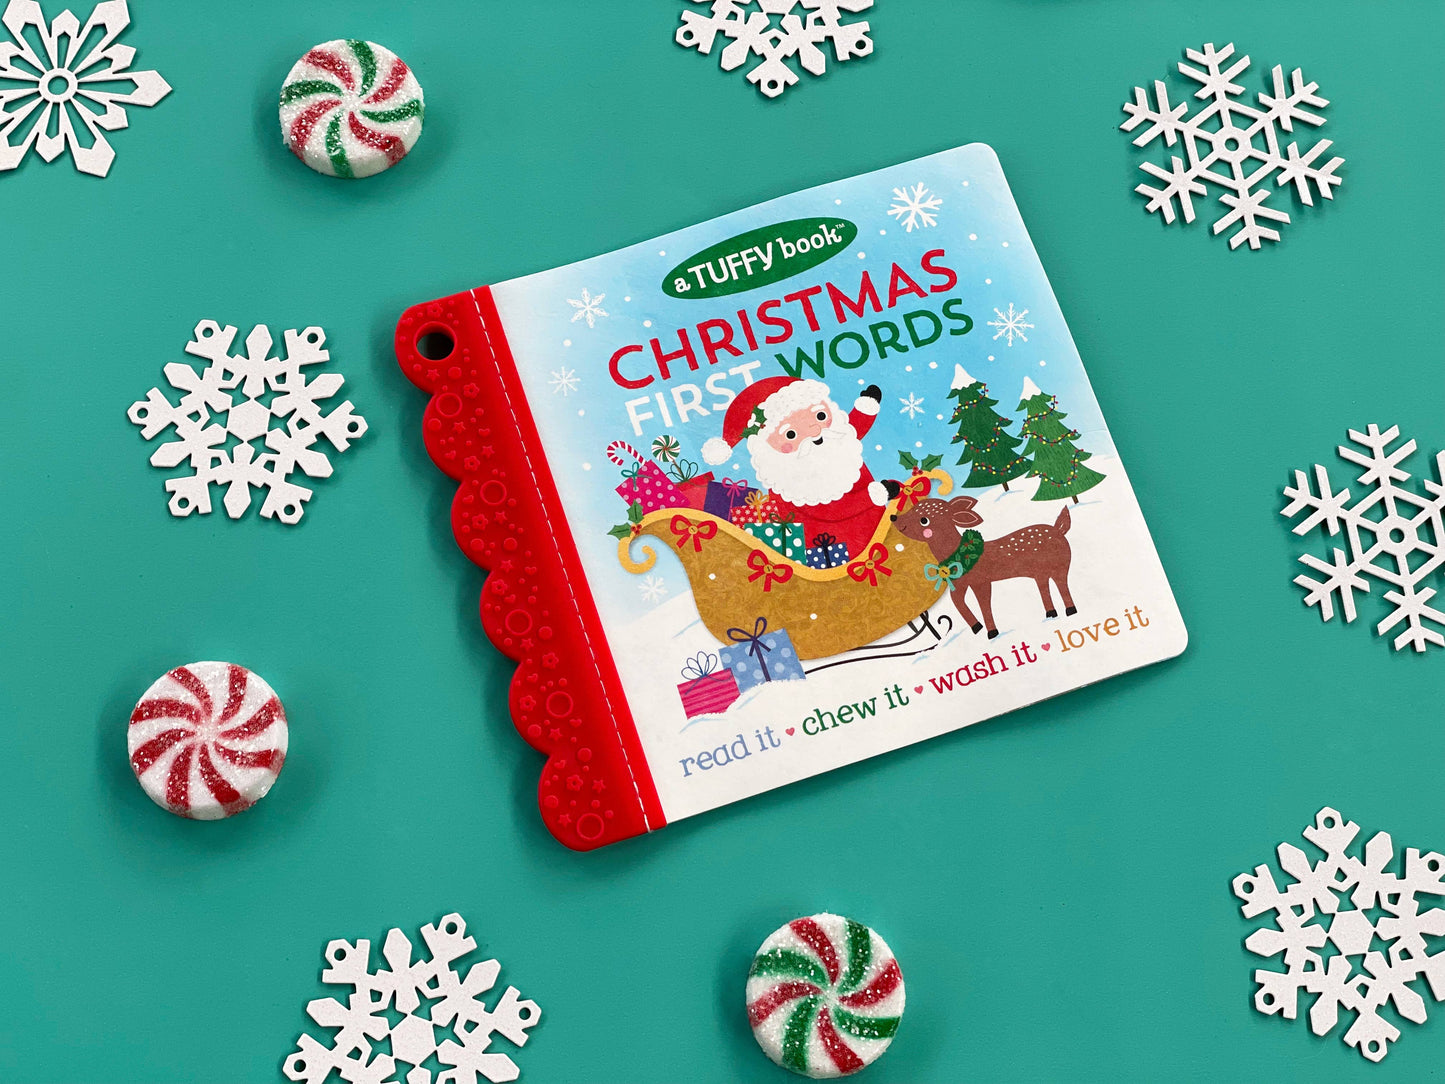 Christmas First Words (Tuffy Teether Indestructible Book)